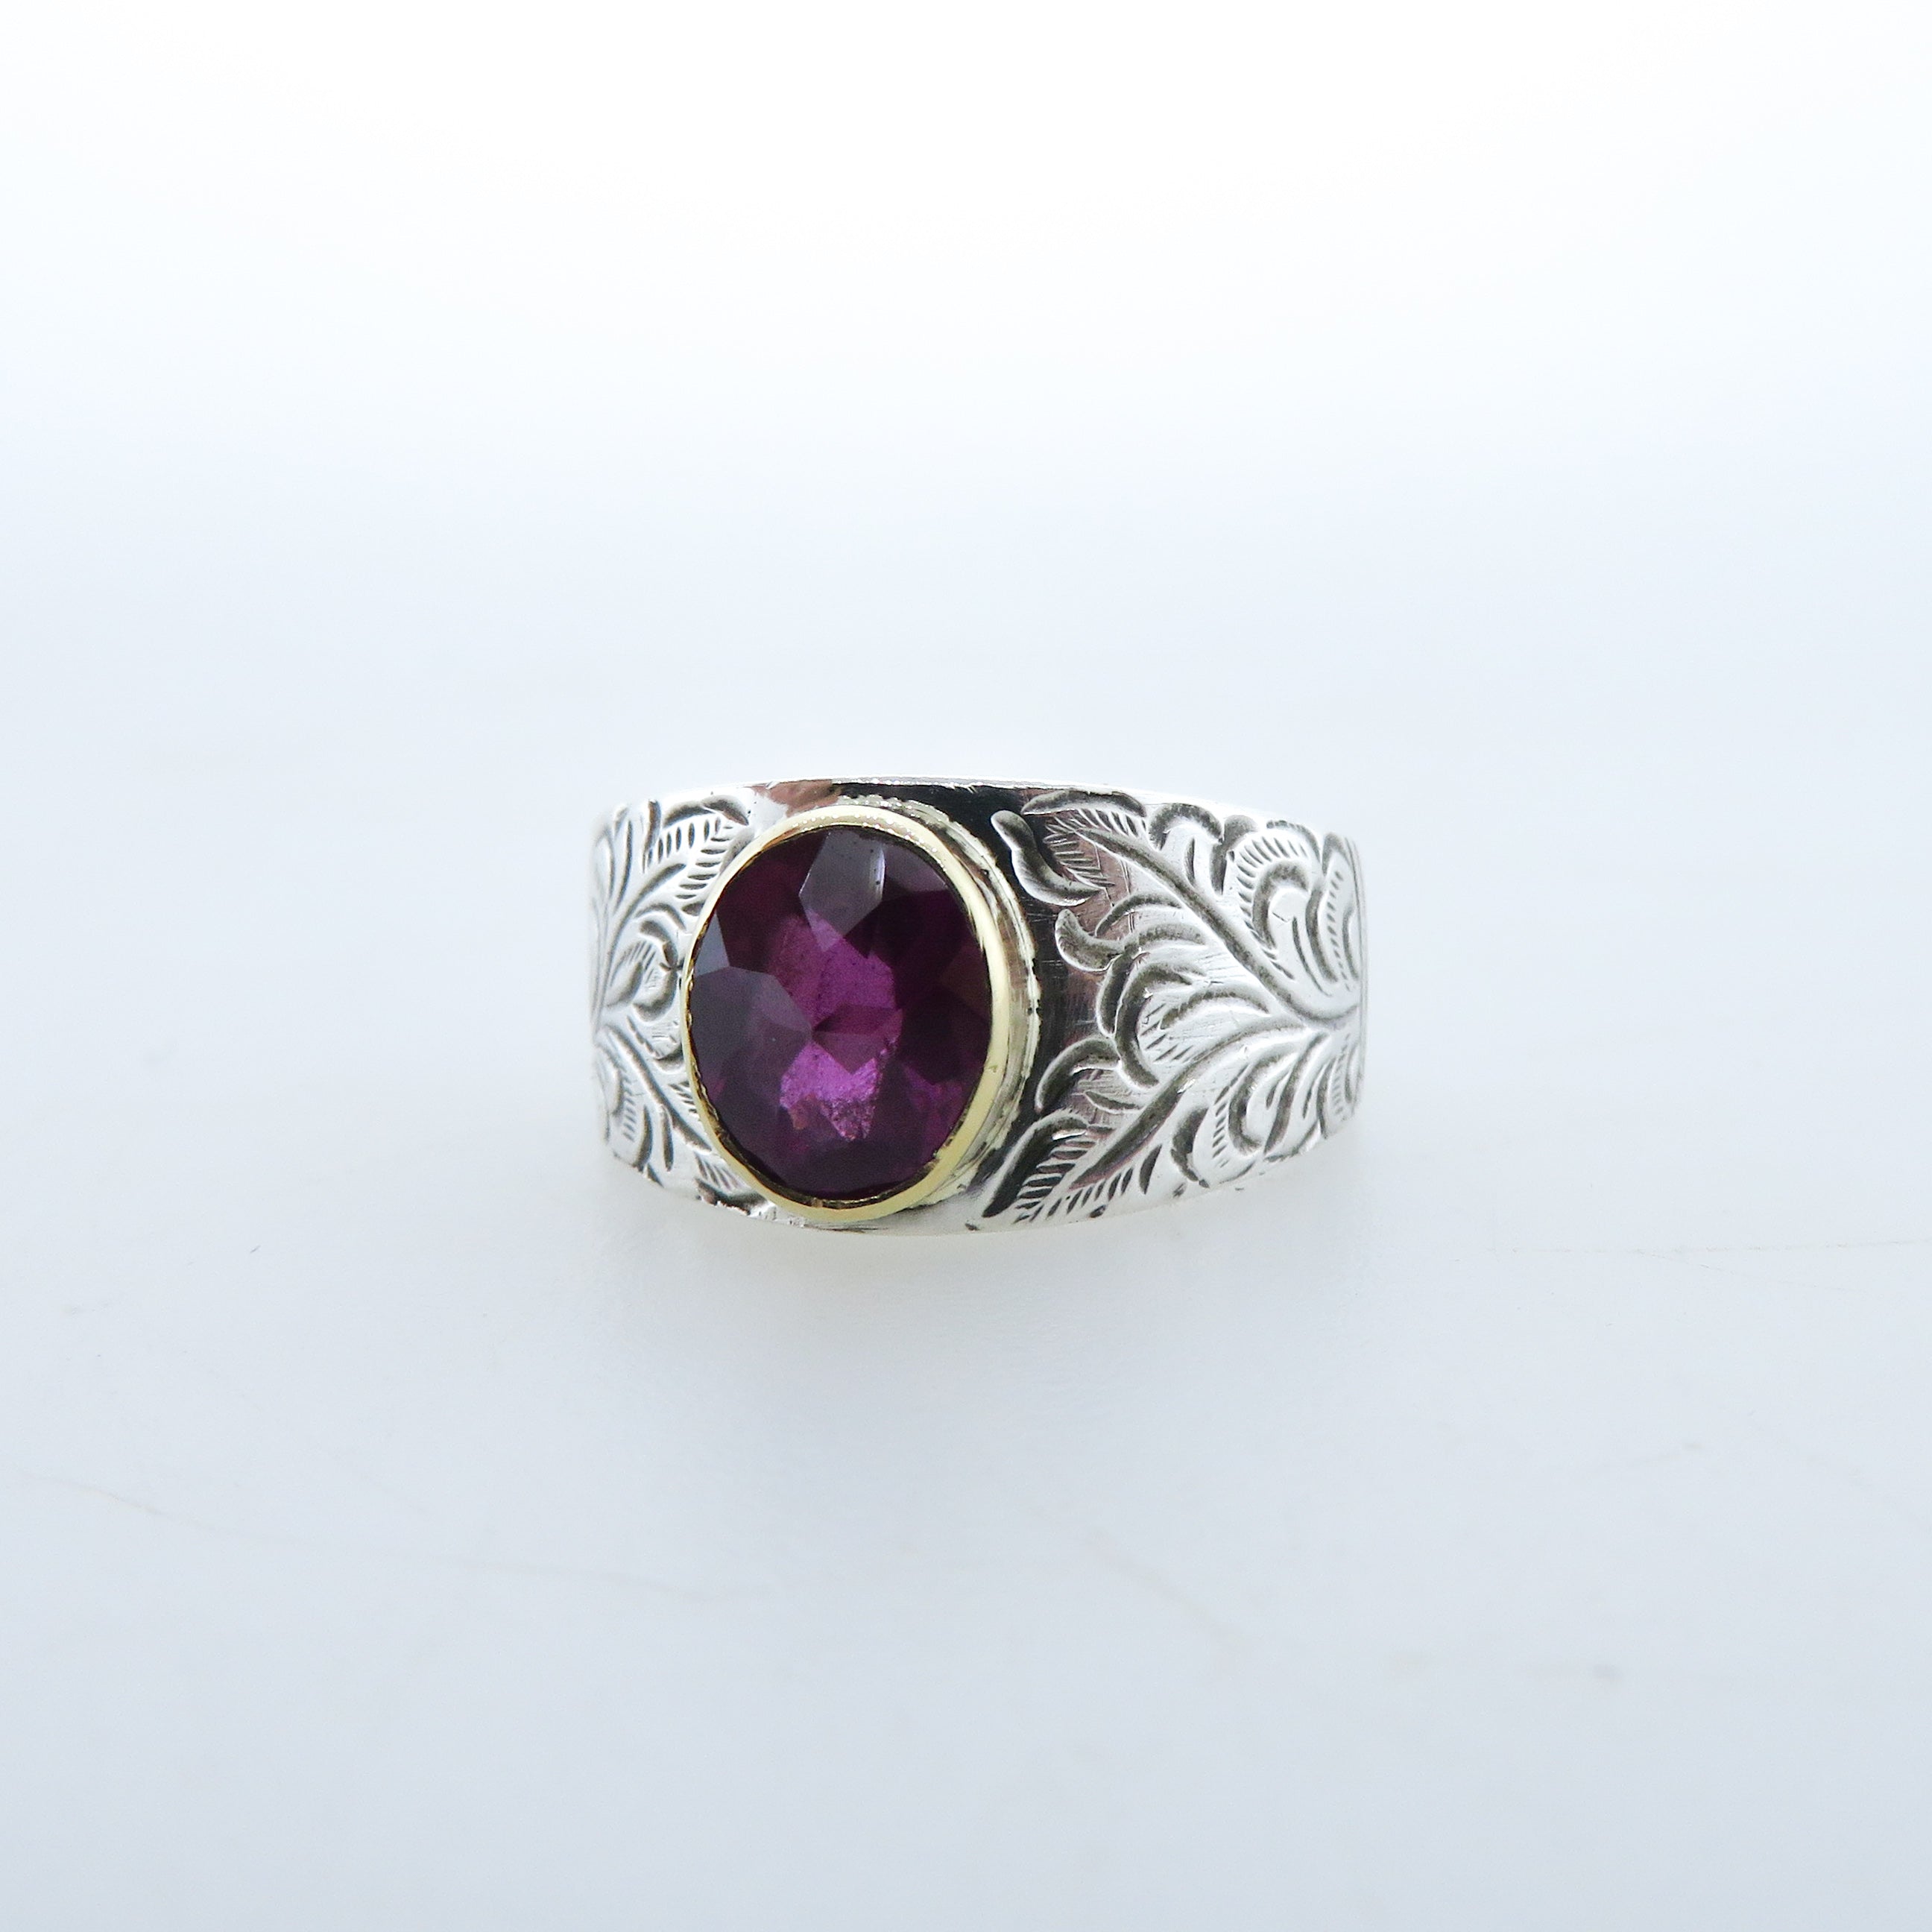 Pink Tourmaline Sterling Silver Ring with 18k Gold